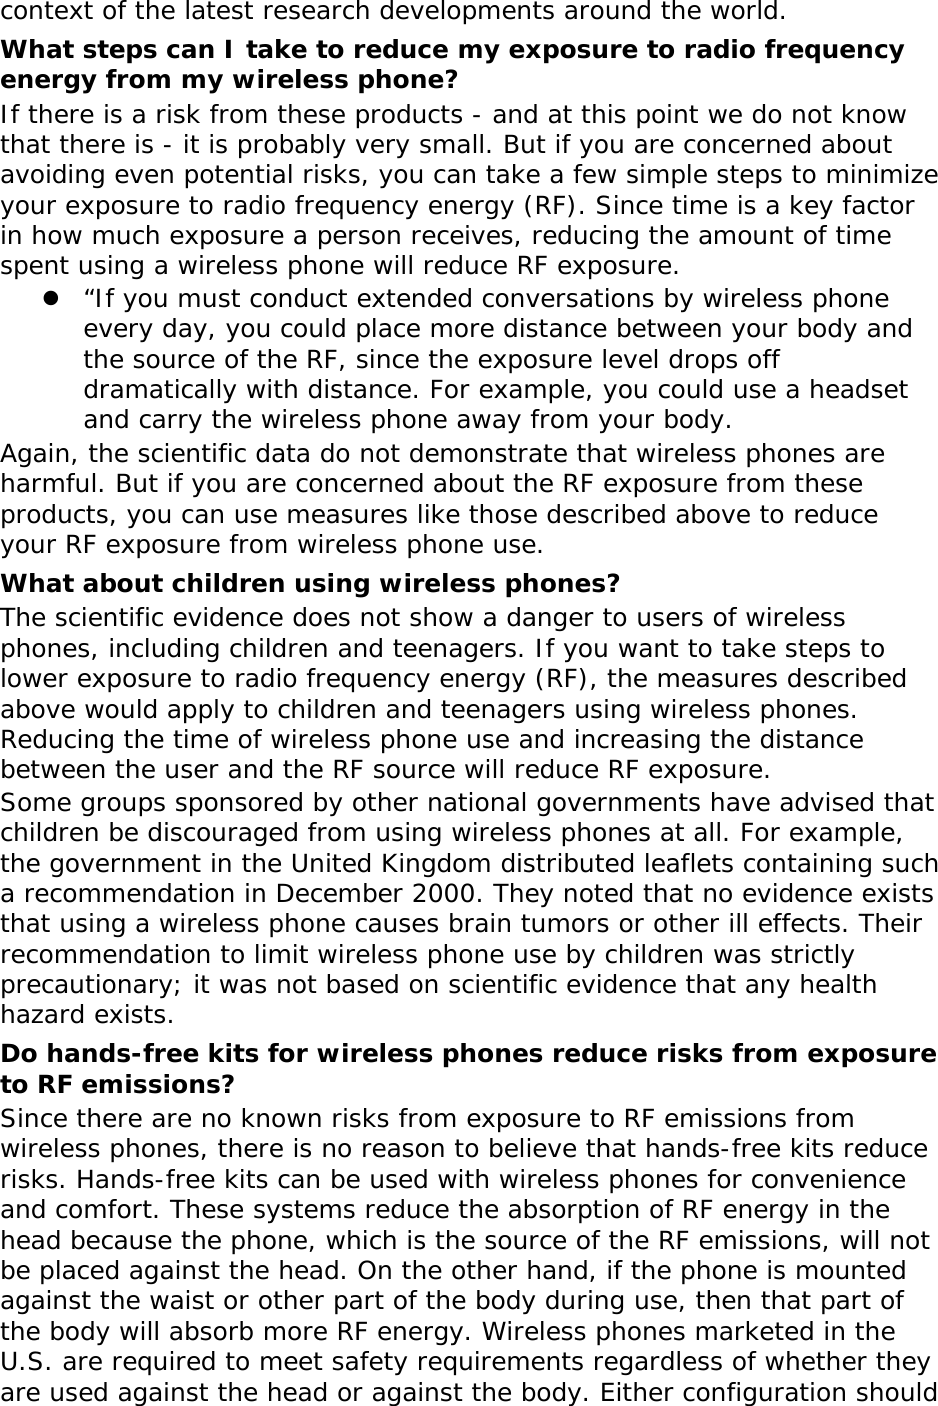 context of the latest research developments around the world. What steps can I take to reduce my exposure to radio frequency energy from my wireless phone? If there is a risk from these products - and at this point we do not know that there is - it is probably very small. But if you are concerned about avoiding even potential risks, you can take a few simple steps to minimize your exposure to radio frequency energy (RF). Since time is a key factor in how much exposure a person receives, reducing the amount of time spent using a wireless phone will reduce RF exposure.  “If you must conduct extended conversations by wireless phone every day, you could place more distance between your body and the source of the RF, since the exposure level drops off dramatically with distance. For example, you could use a headset and carry the wireless phone away from your body. Again, the scientific data do not demonstrate that wireless phones are harmful. But if you are concerned about the RF exposure from these products, you can use measures like those described above to reduce your RF exposure from wireless phone use. What about children using wireless phones? The scientific evidence does not show a danger to users of wireless phones, including children and teenagers. If you want to take steps to lower exposure to radio frequency energy (RF), the measures described above would apply to children and teenagers using wireless phones. Reducing the time of wireless phone use and increasing the distance between the user and the RF source will reduce RF exposure. Some groups sponsored by other national governments have advised that children be discouraged from using wireless phones at all. For example, the government in the United Kingdom distributed leaflets containing such a recommendation in December 2000. They noted that no evidence exists that using a wireless phone causes brain tumors or other ill effects. Their recommendation to limit wireless phone use by children was strictly precautionary; it was not based on scientific evidence that any health hazard exists.  Do hands-free kits for wireless phones reduce risks from exposure to RF emissions? Since there are no known risks from exposure to RF emissions from wireless phones, there is no reason to believe that hands-free kits reduce risks. Hands-free kits can be used with wireless phones for convenience and comfort. These systems reduce the absorption of RF energy in the head because the phone, which is the source of the RF emissions, will not be placed against the head. On the other hand, if the phone is mounted against the waist or other part of the body during use, then that part of the body will absorb more RF energy. Wireless phones marketed in the U.S. are required to meet safety requirements regardless of whether they are used against the head or against the body. Either configuration should 